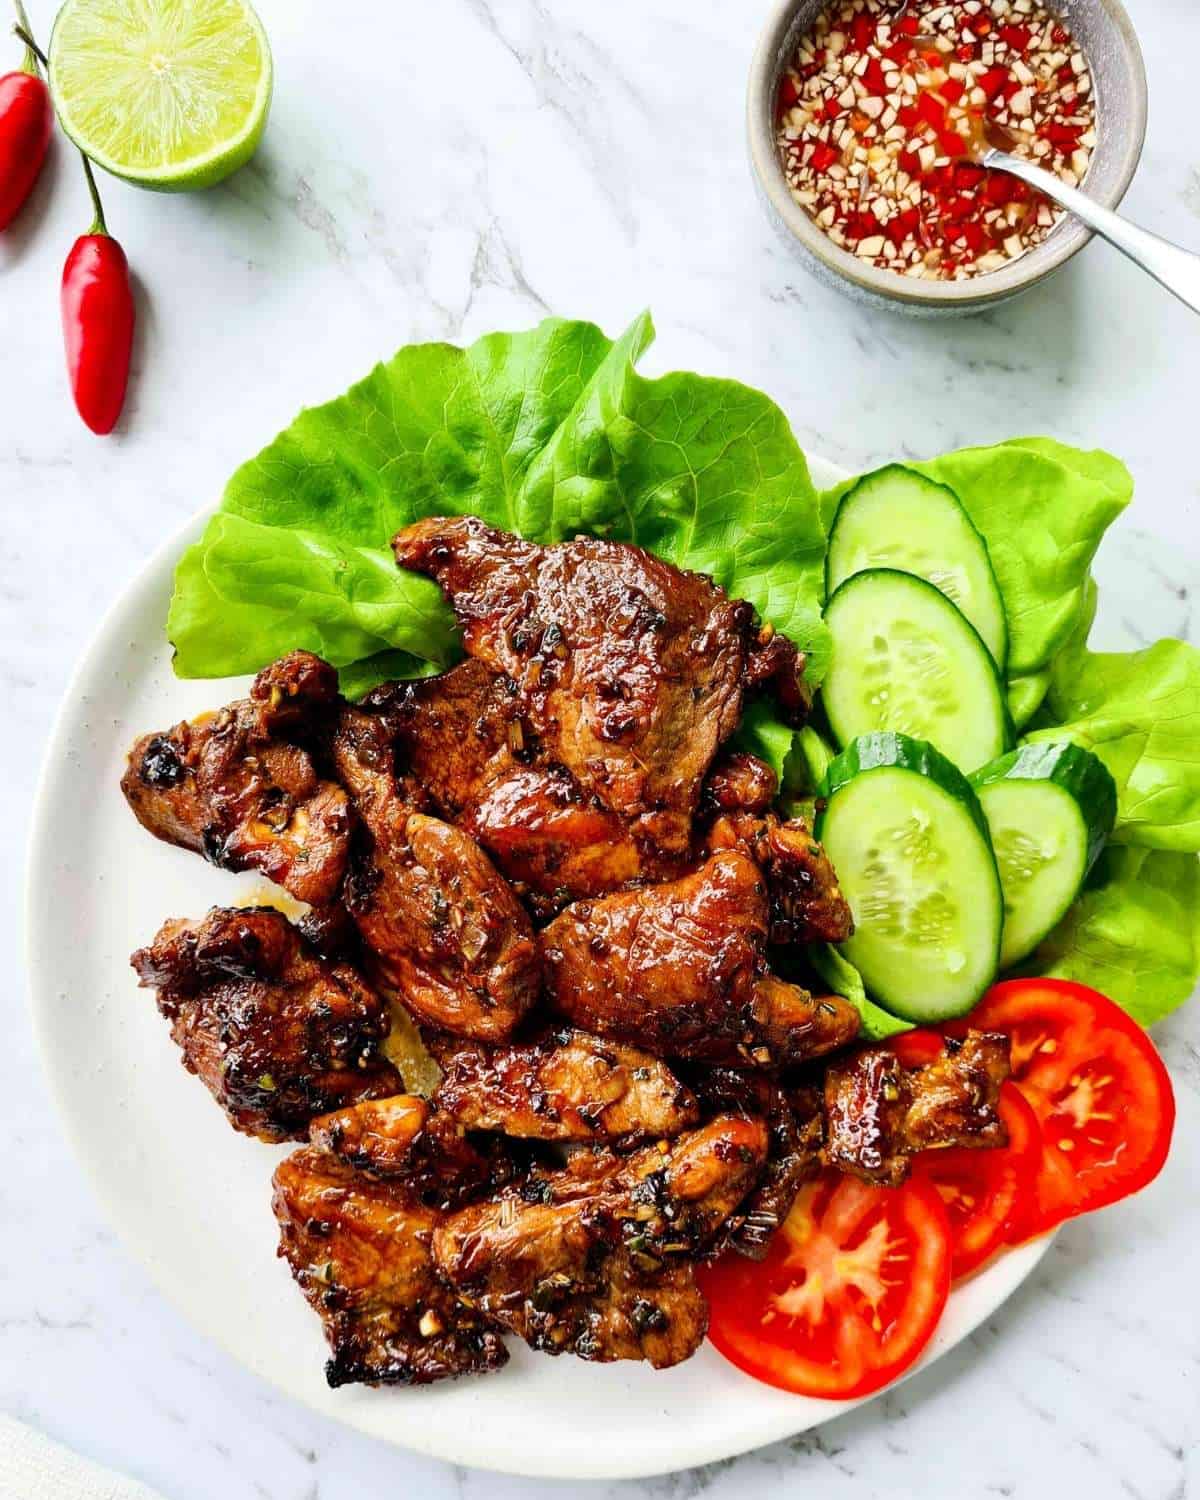 A large plate of cooked Vietnamese pork chops with fresh lettuce, cucumber and tomato slices.